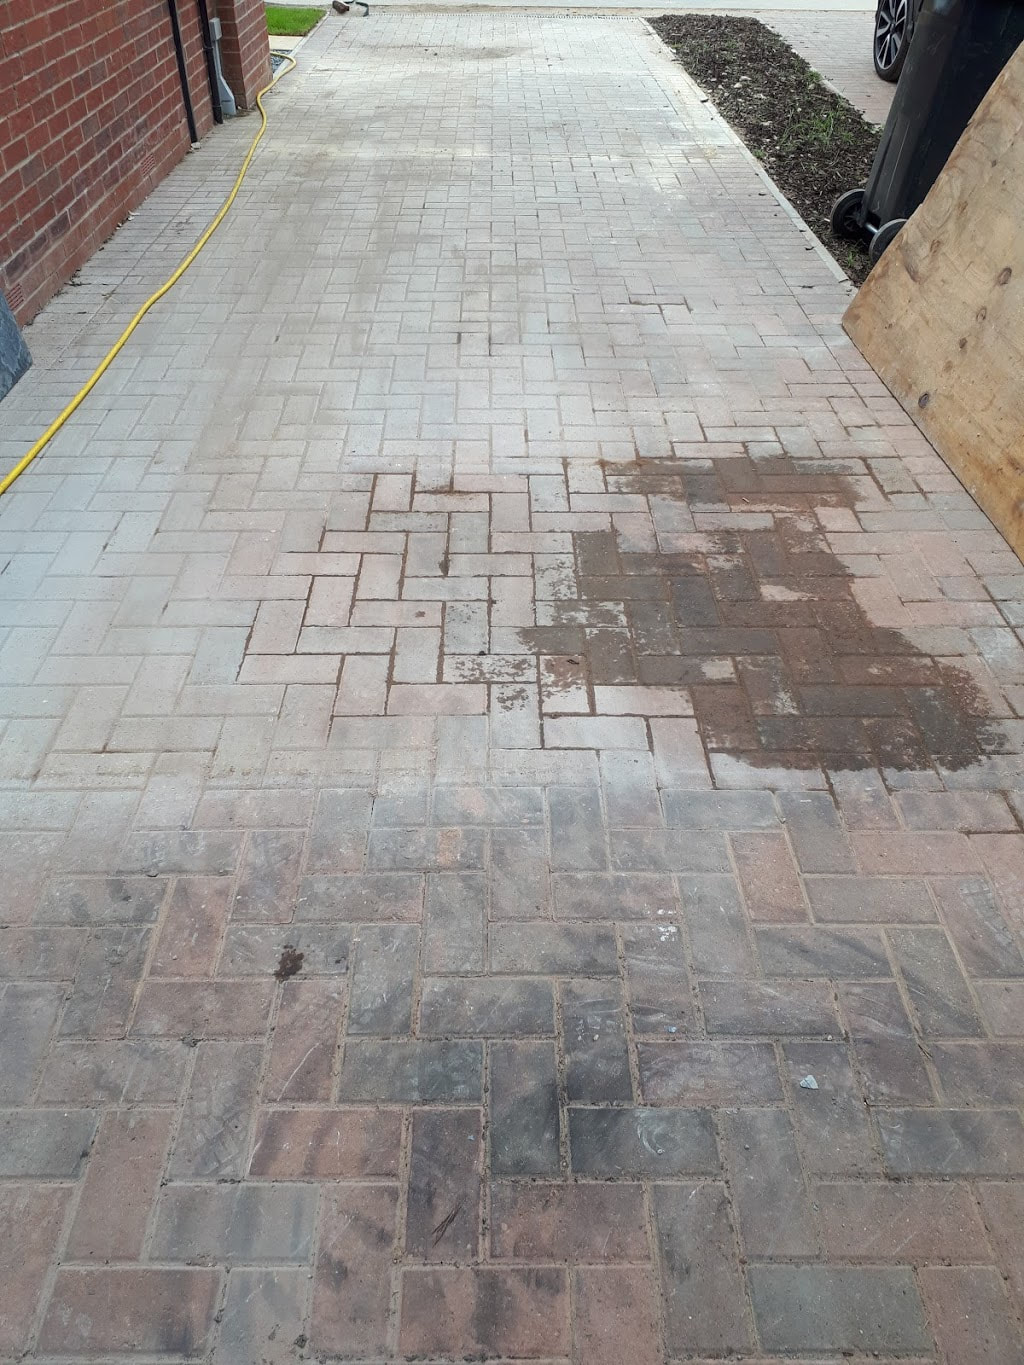 Block paving before being professionally cleaned